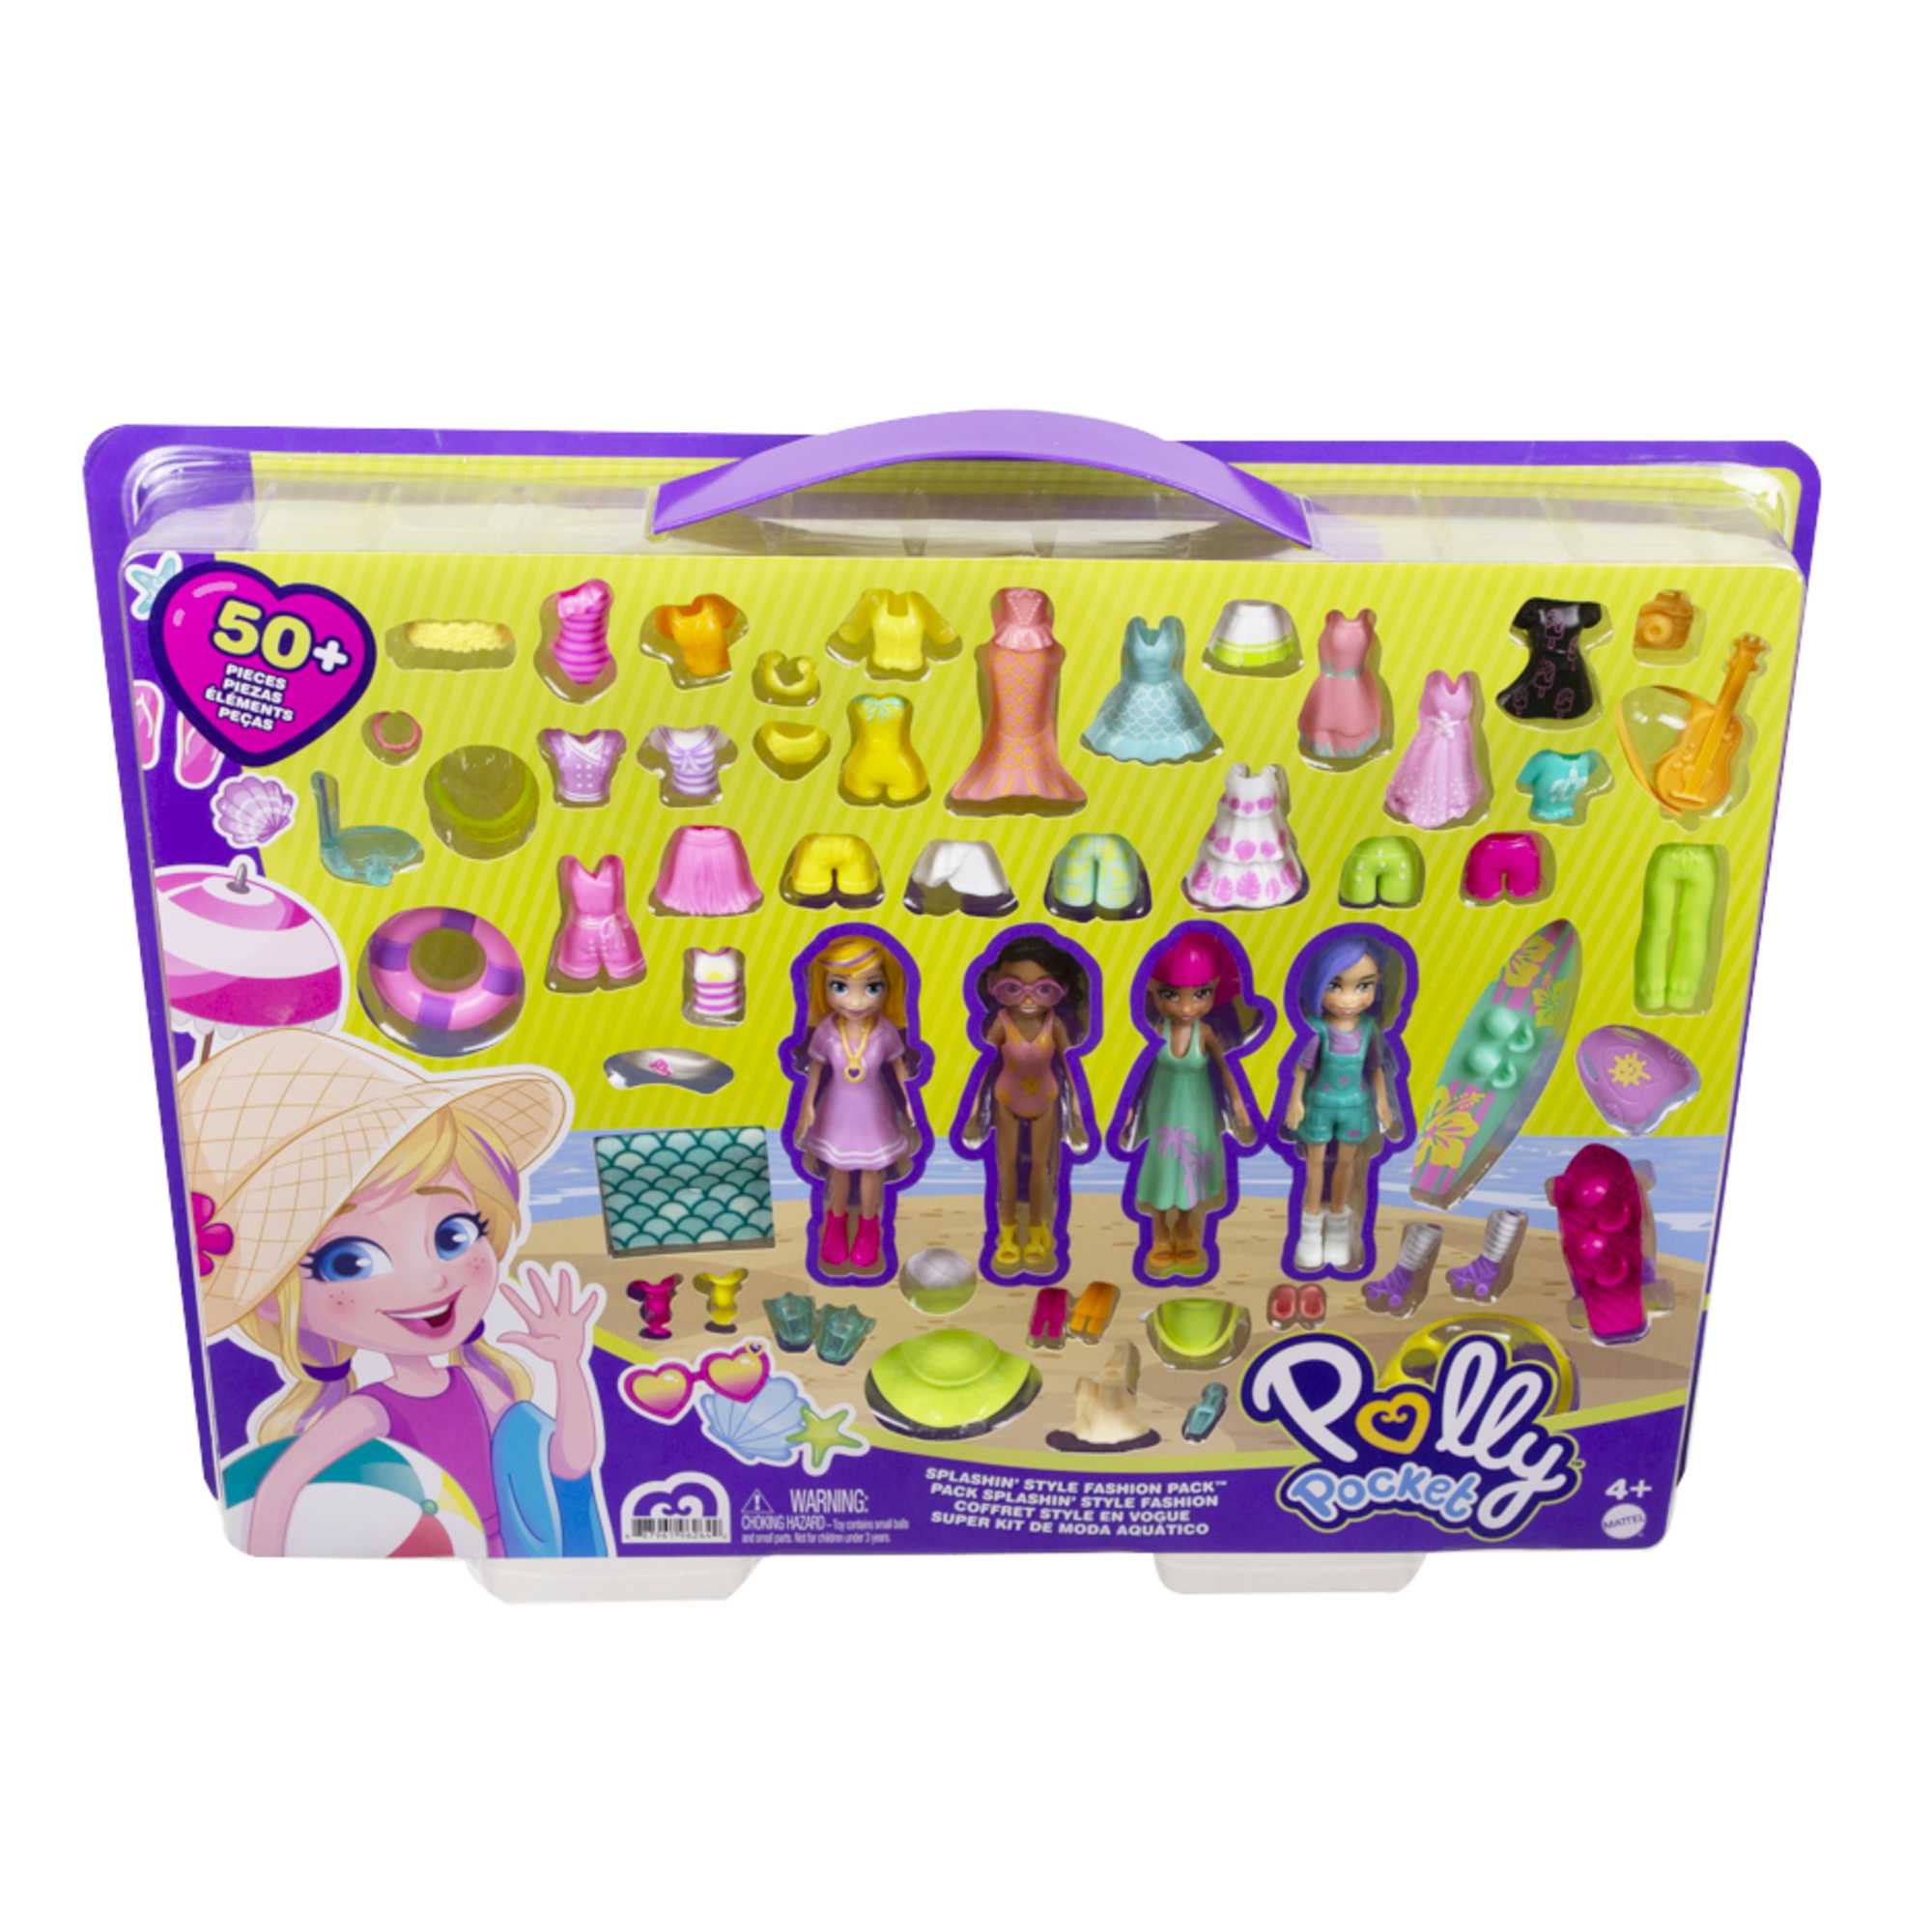 Polly Pocket Smoothie Splash Pack, Playset with 4 (3-inch) Dolls, Fashion & 20+ Outdoor Accessories